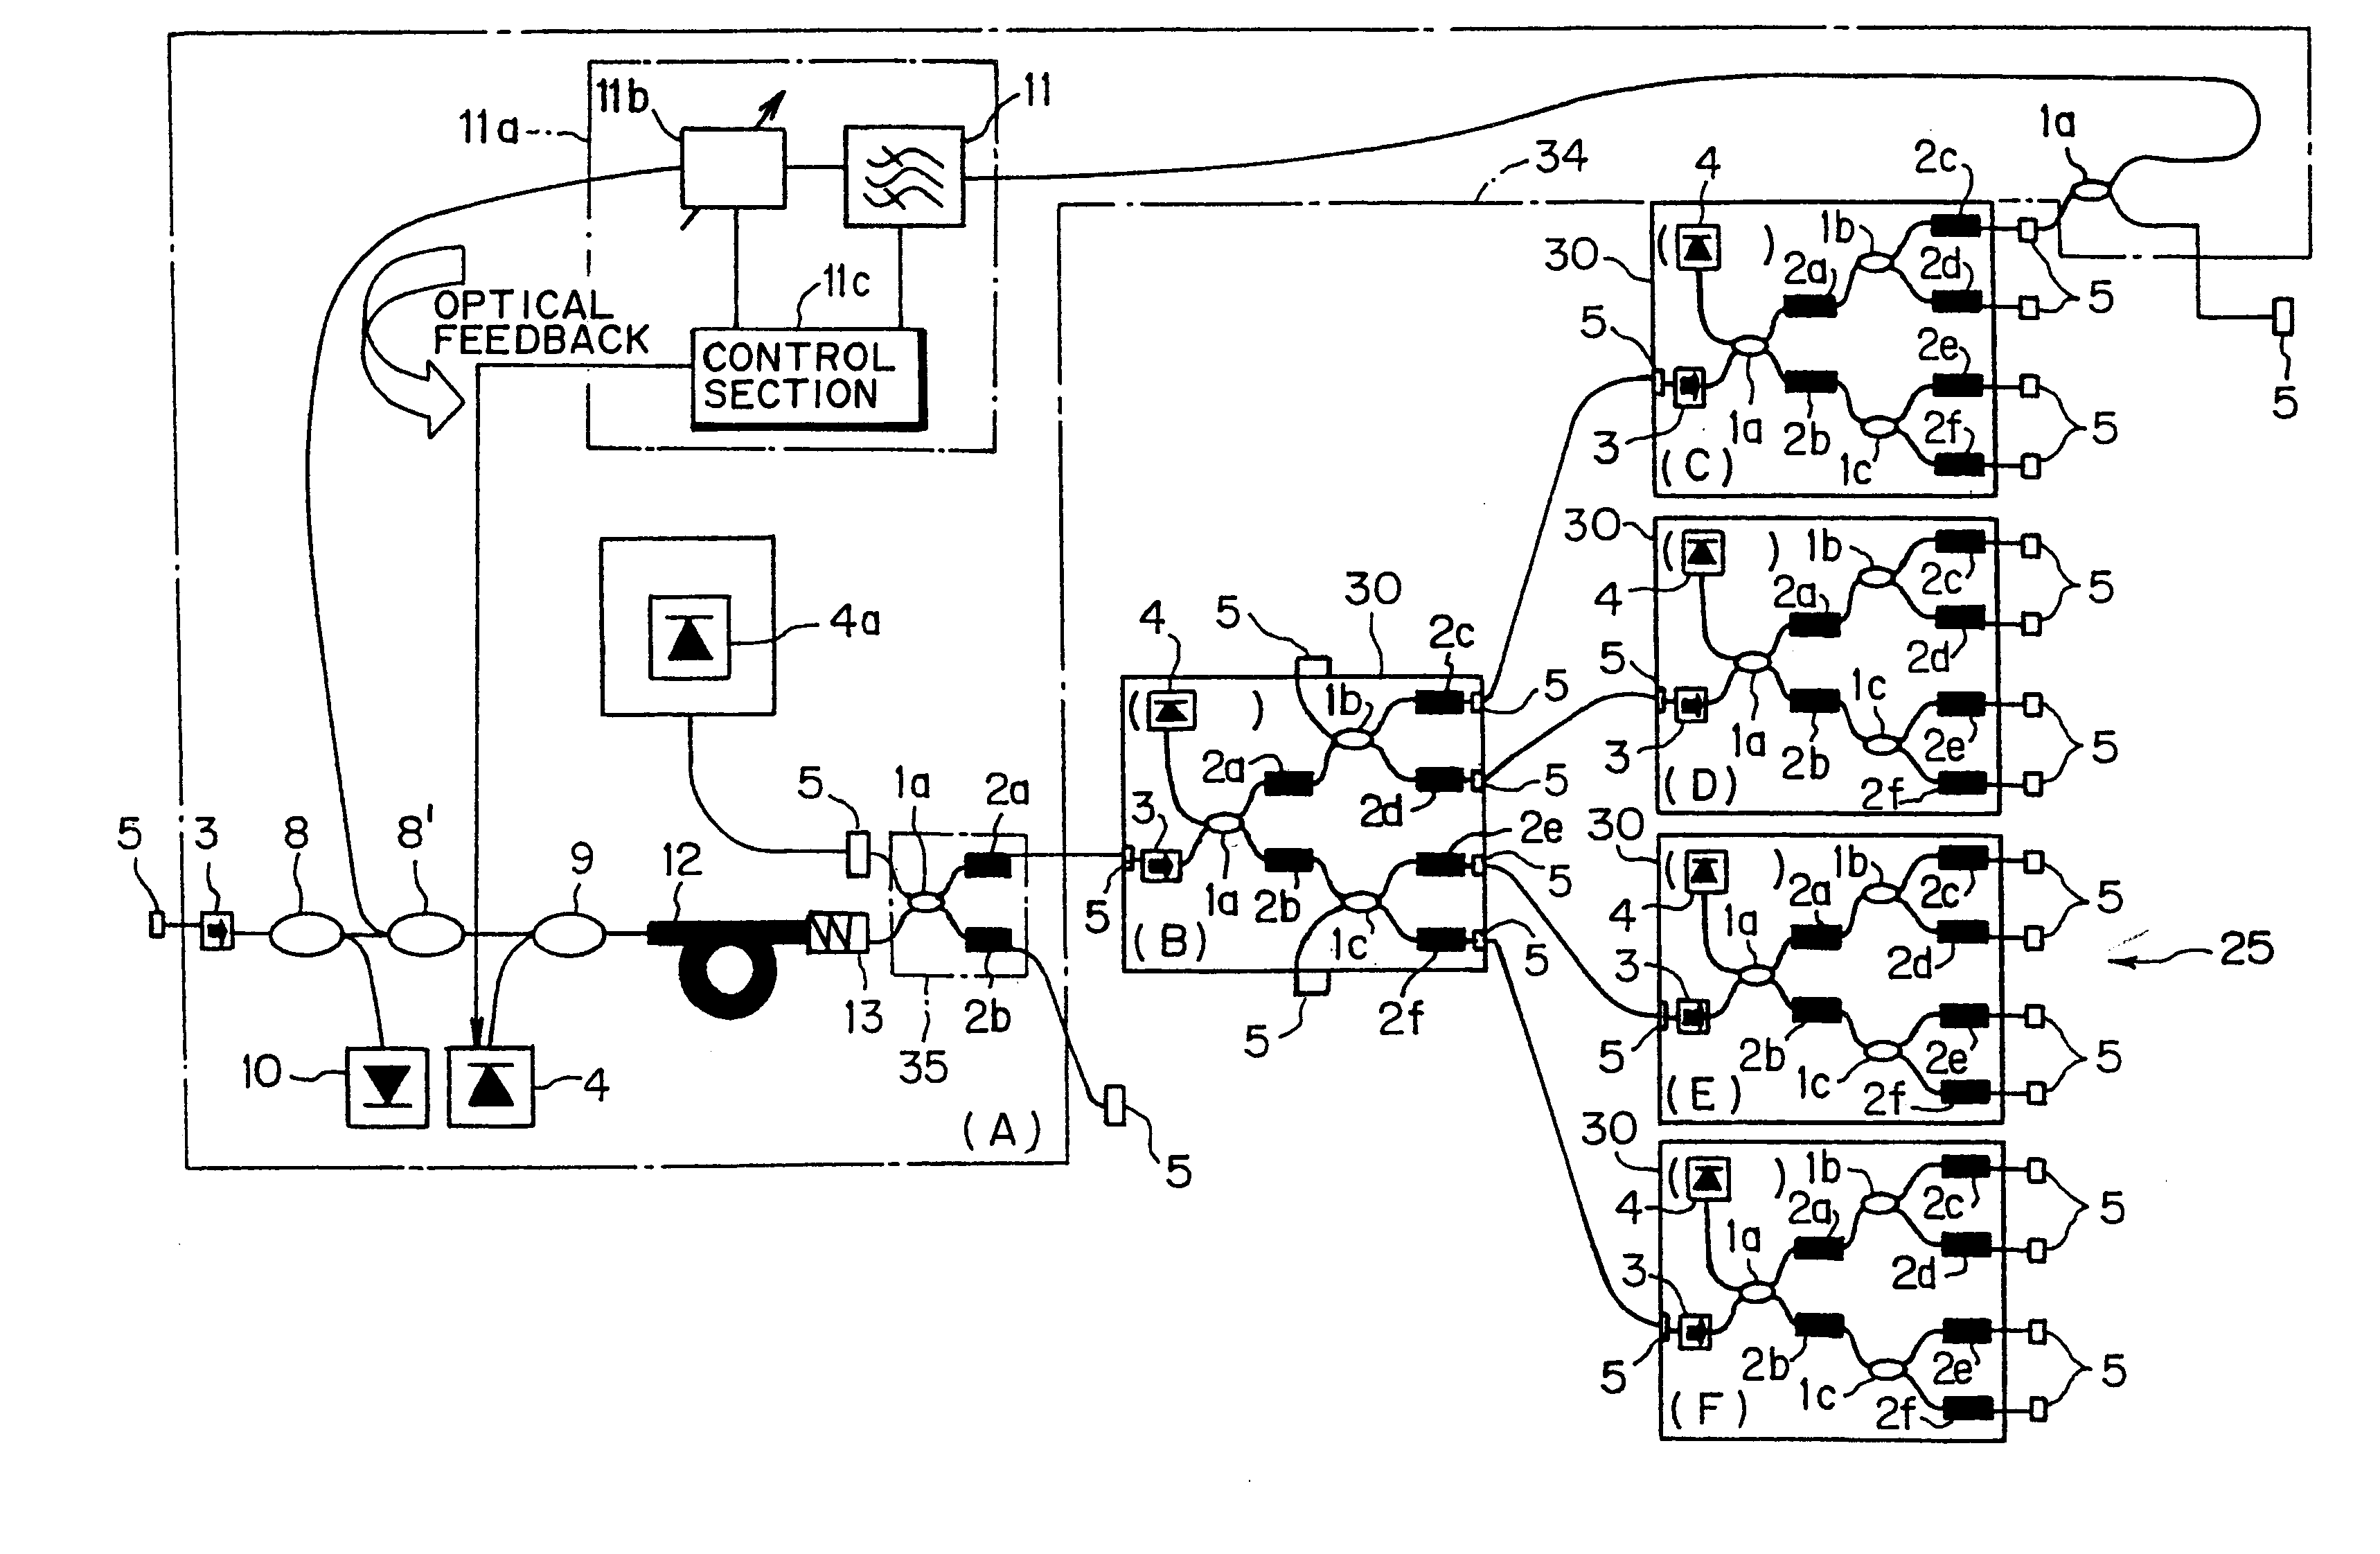 Wavelength-multiplexed light amplifying apparatus, optical amplifier and optical add-and-drop apparatus using wavelength-multiplexed light amplifying basic unit